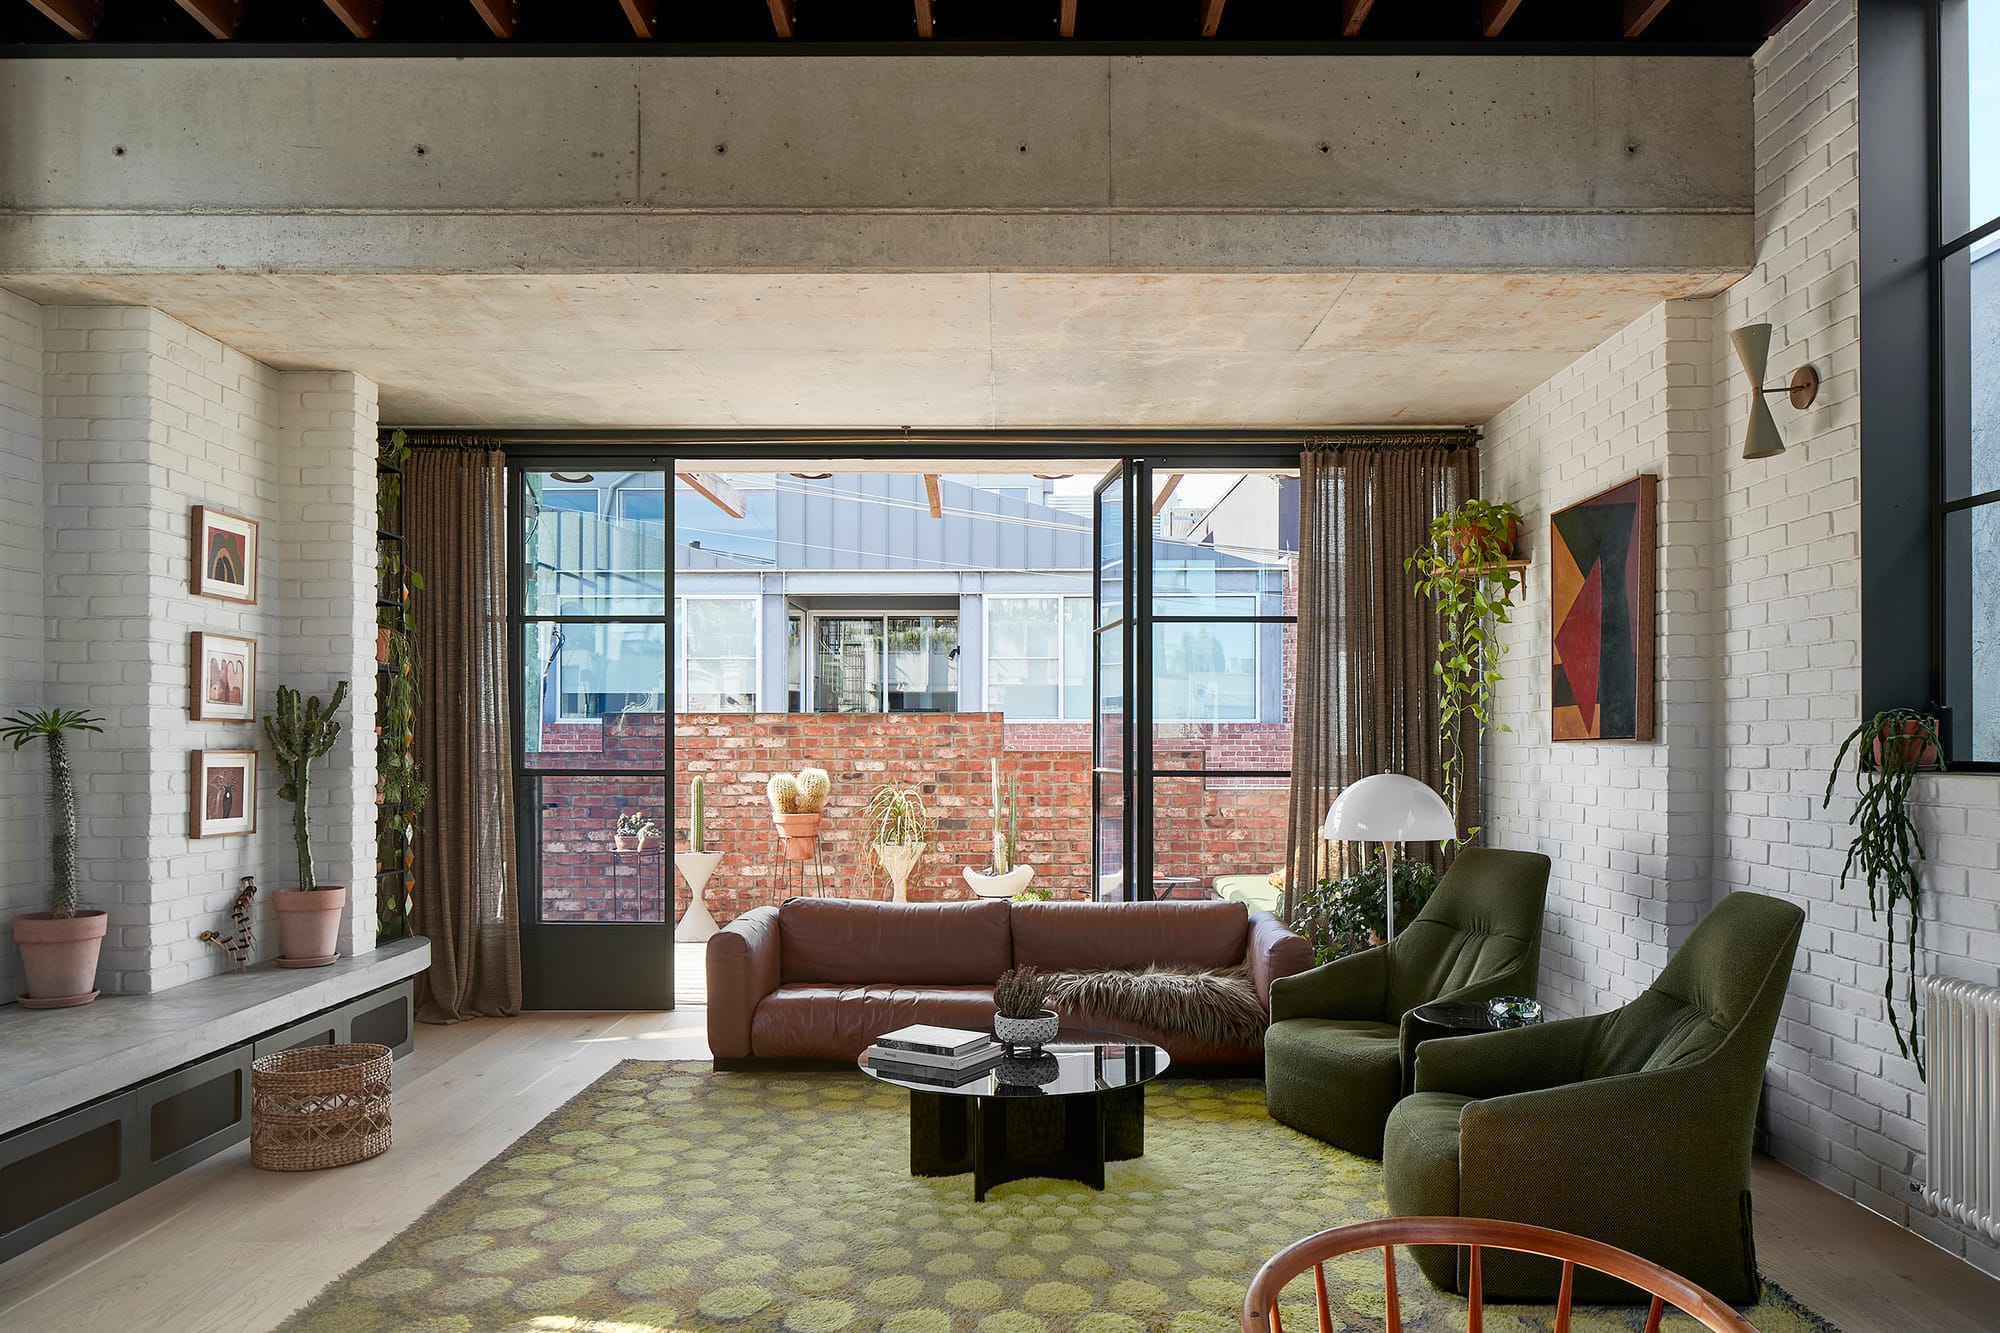 Fabrica by mcmahon and nerlich. Photography by Shannon McGrath. Open plan living space with concrete roof and white brick walls. Green armchairs and brown leather couch. Floor-to-ceiling doors open onto outdoor terrace with red brick wall. 